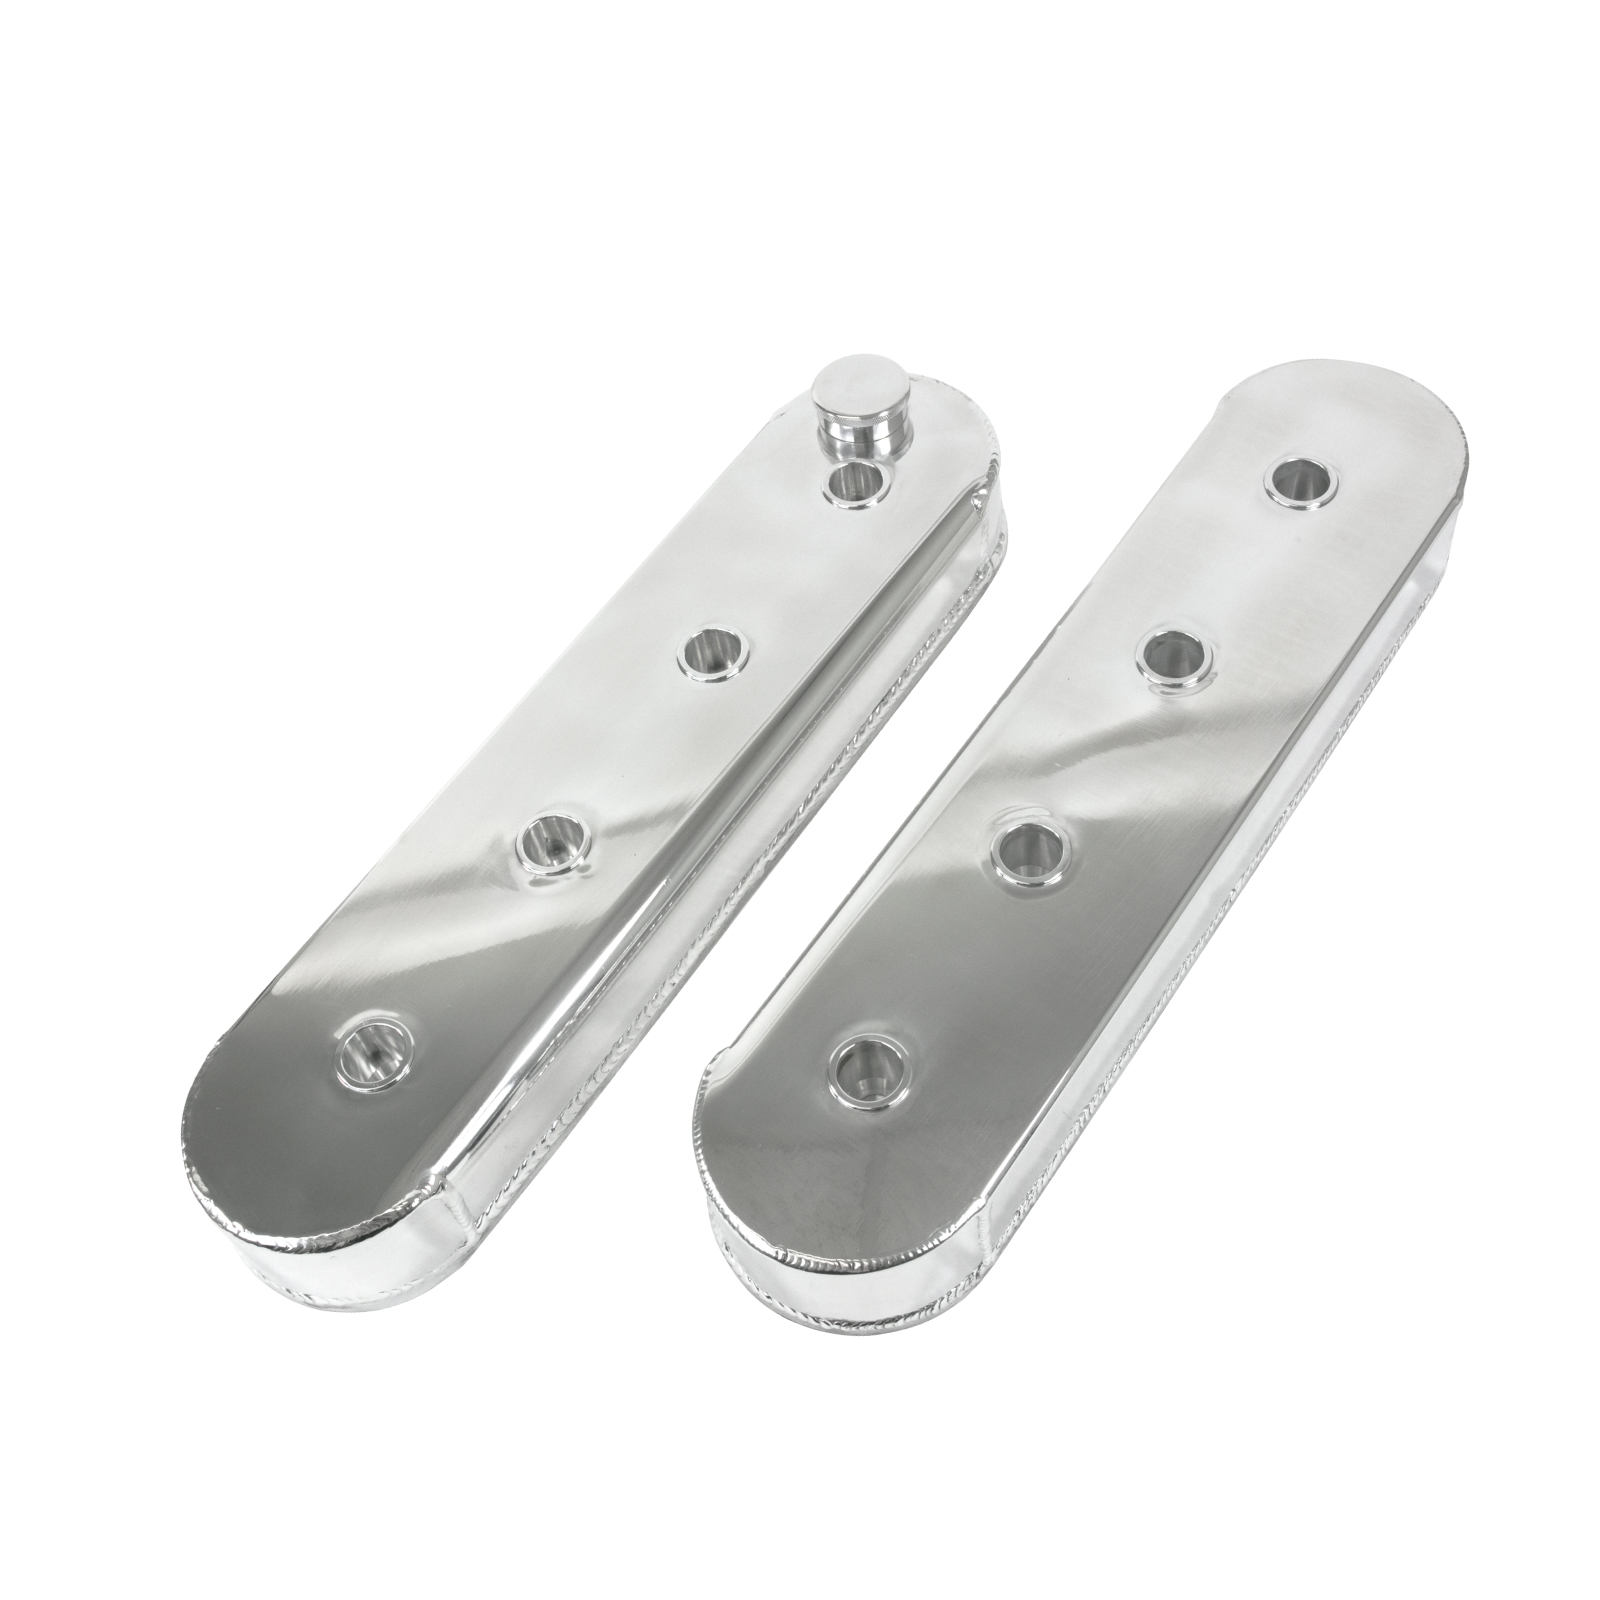 GM LSX V8 (4.8L-7.0L) Clear Anodized Fabricated Aluminum Valve Covers without Coil Bracket Mounts